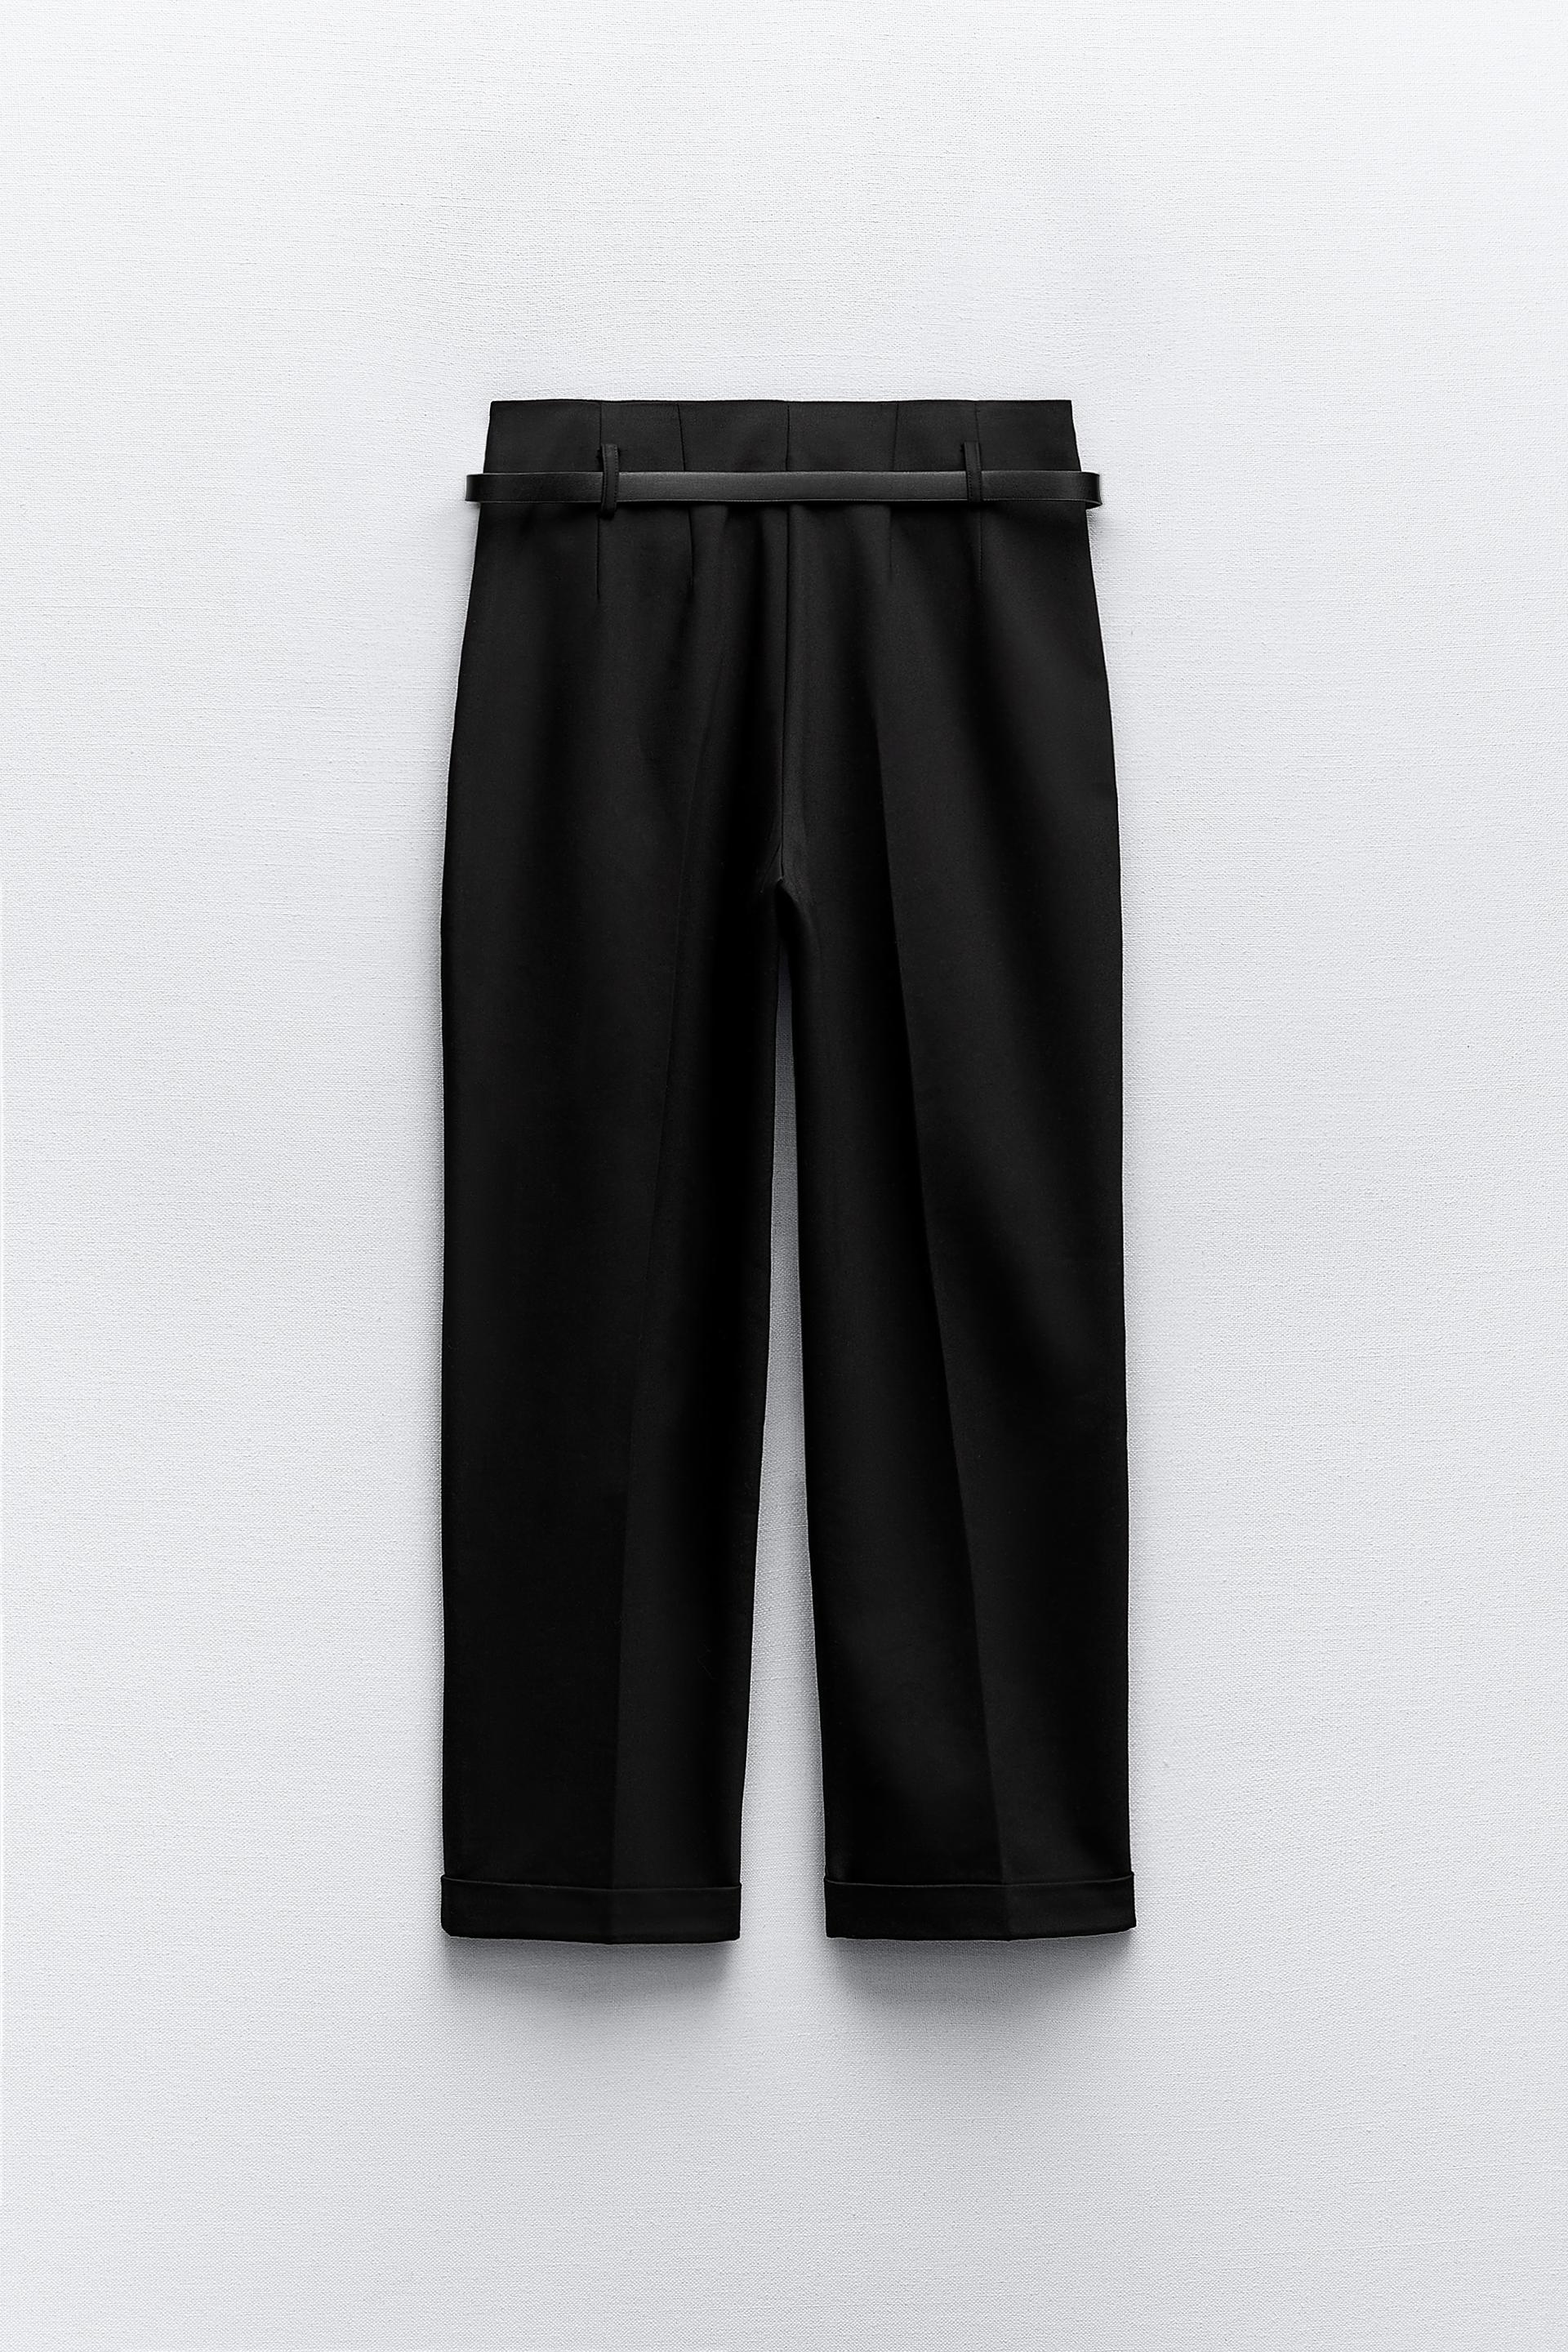 NWT ZARA WOMEN'S BELTED HIGH-WAISTED PANTS BLACK SIZE S M L REF